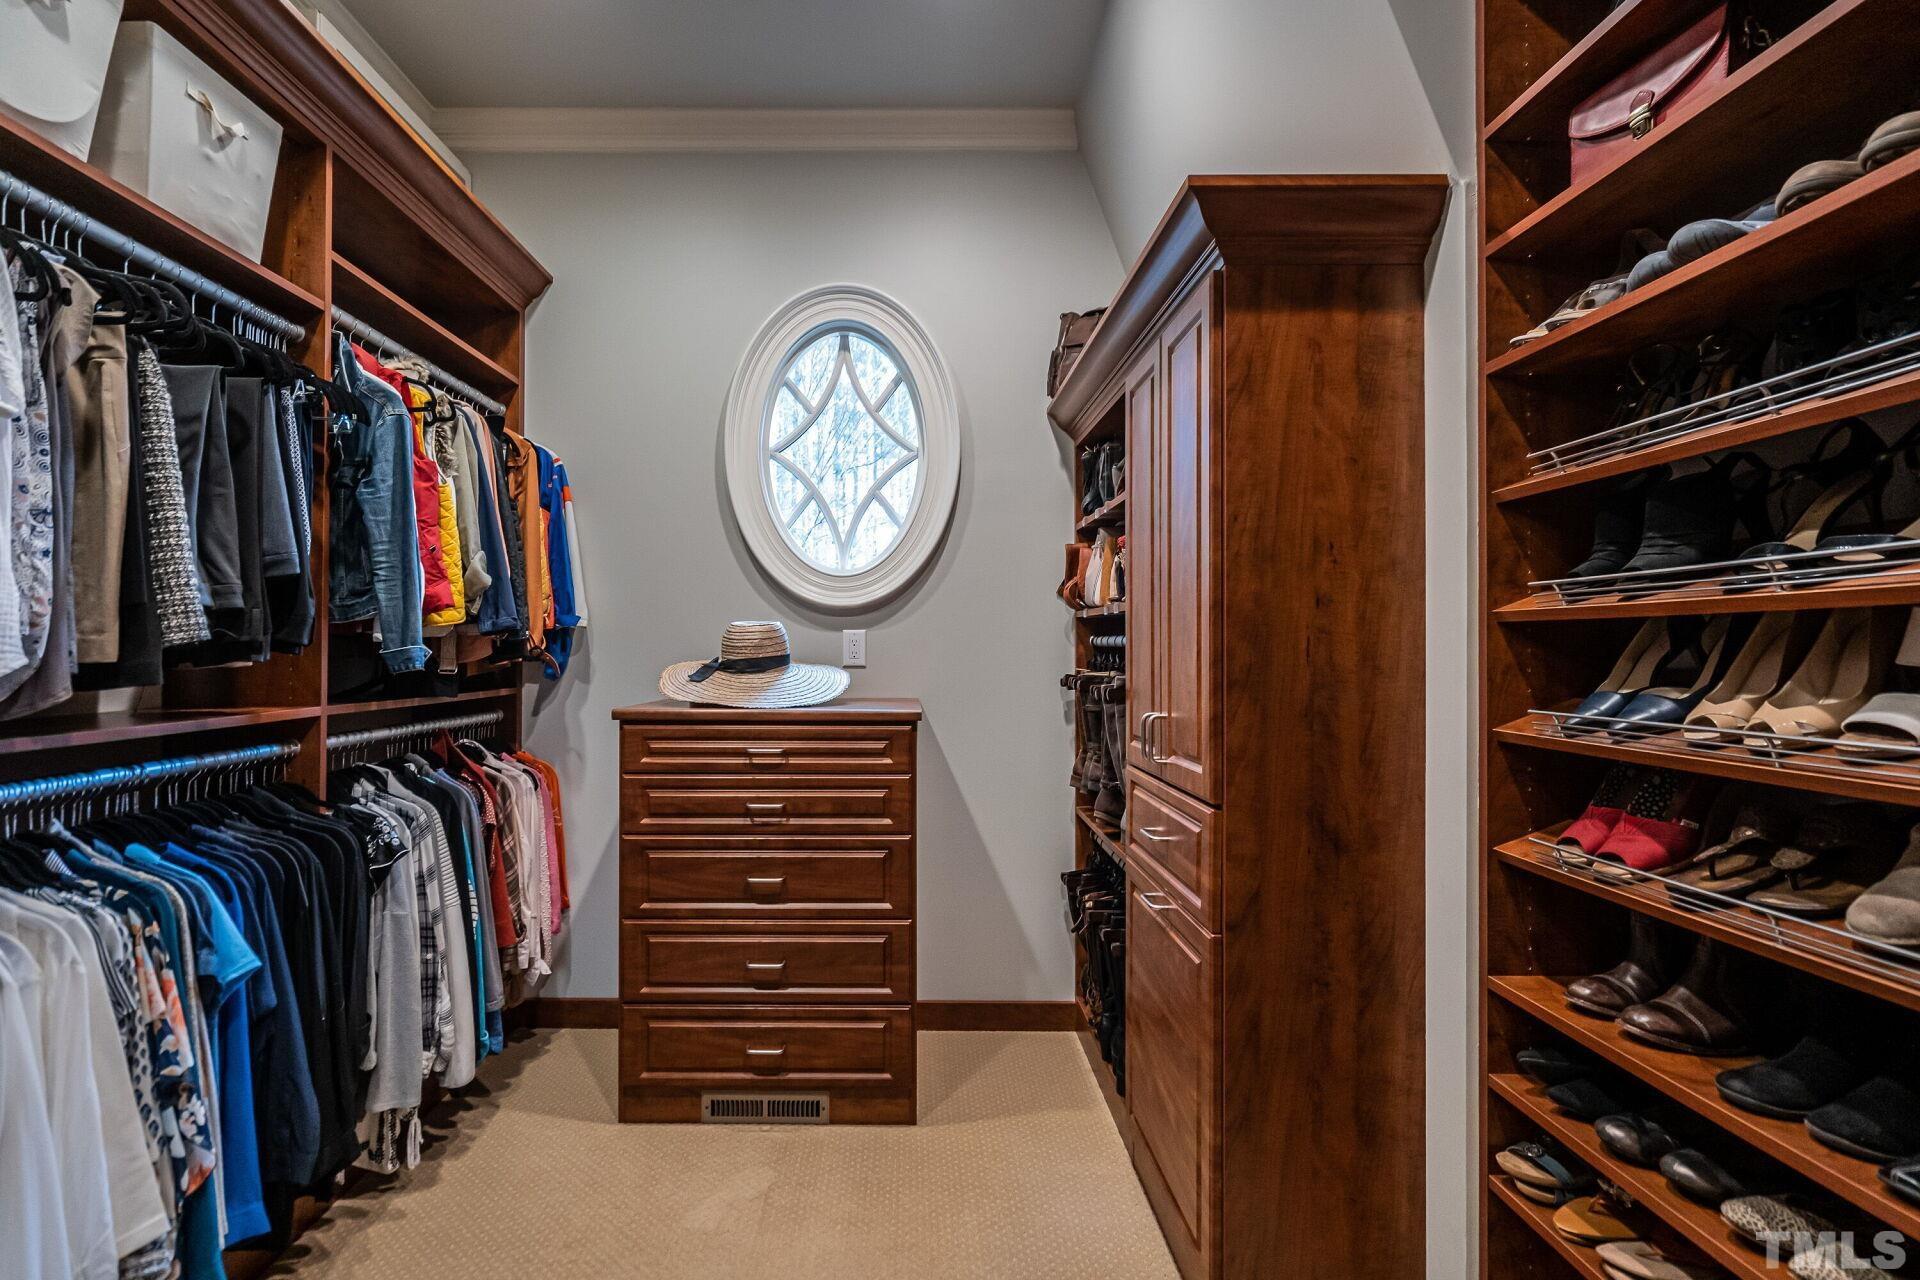 His and Hers custom cabinetry in separate closets.